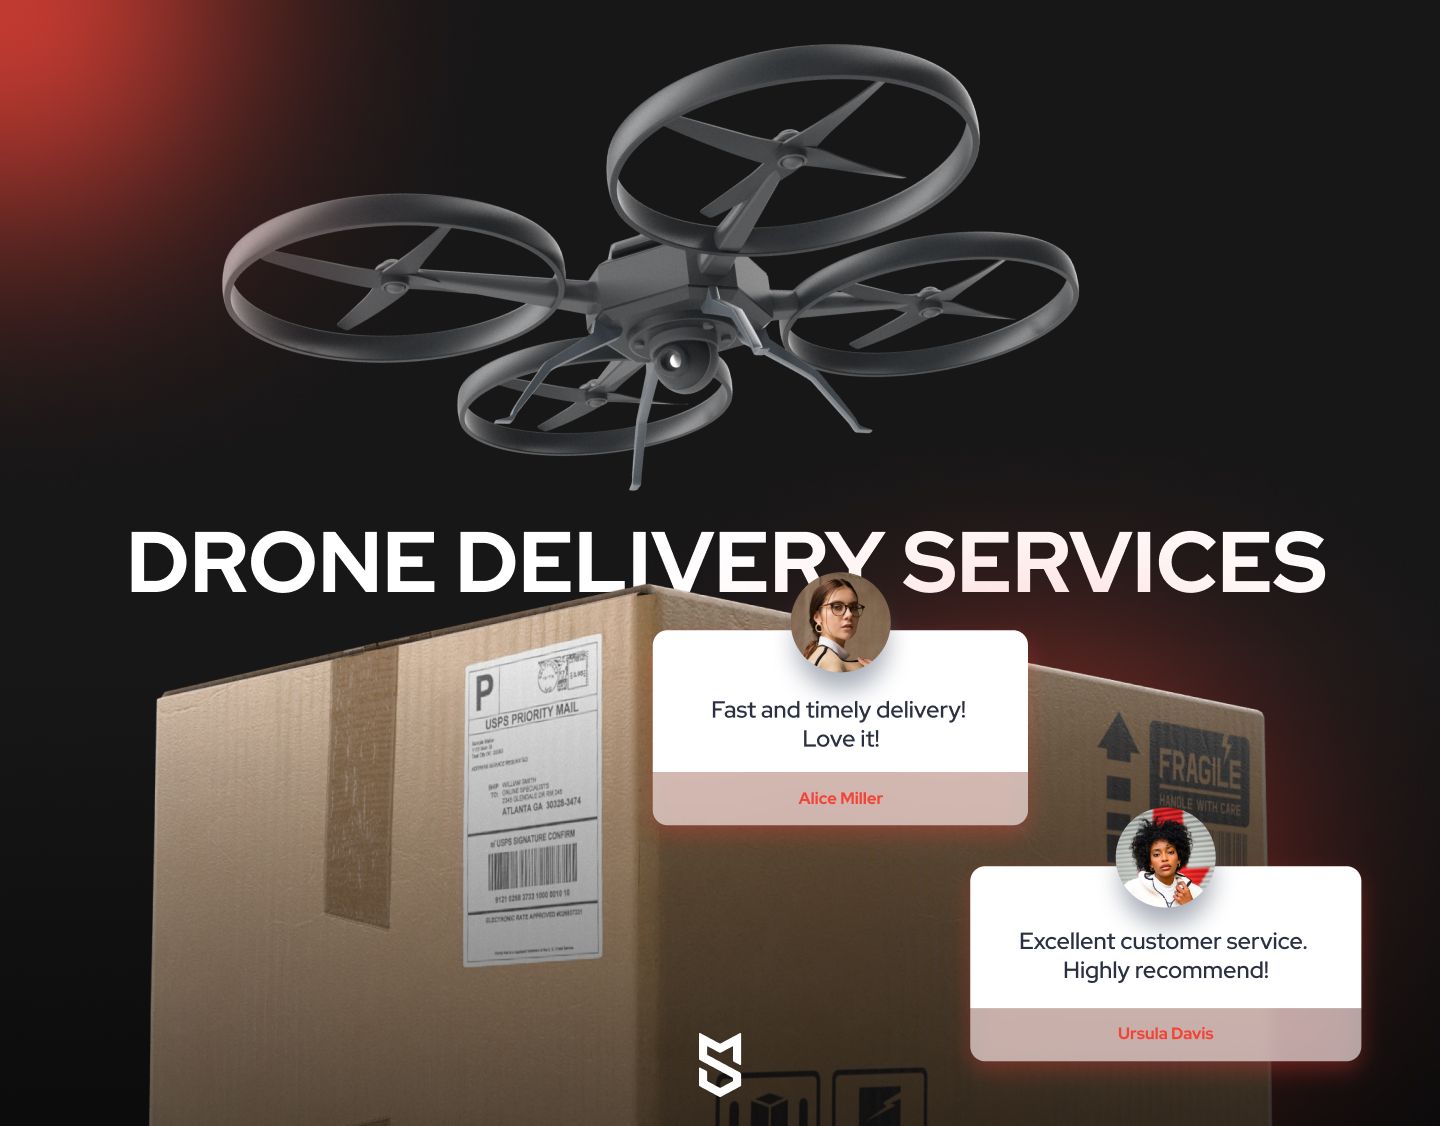 Drone delivery services